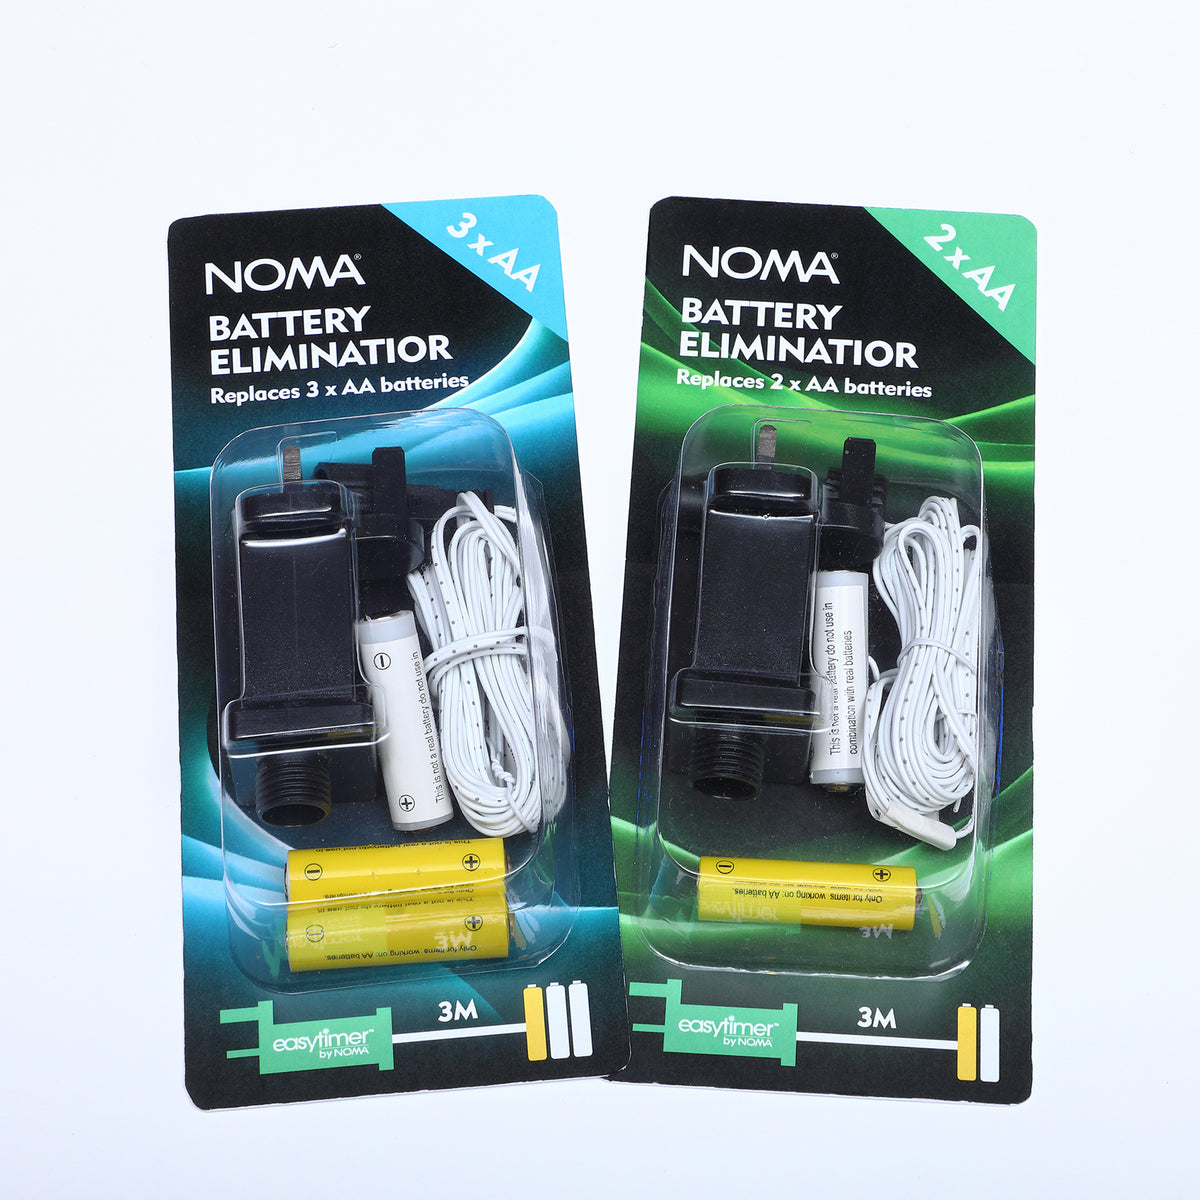 Noma Christmas Battery Eliminator with Easy Timer - 2 x AA batteries